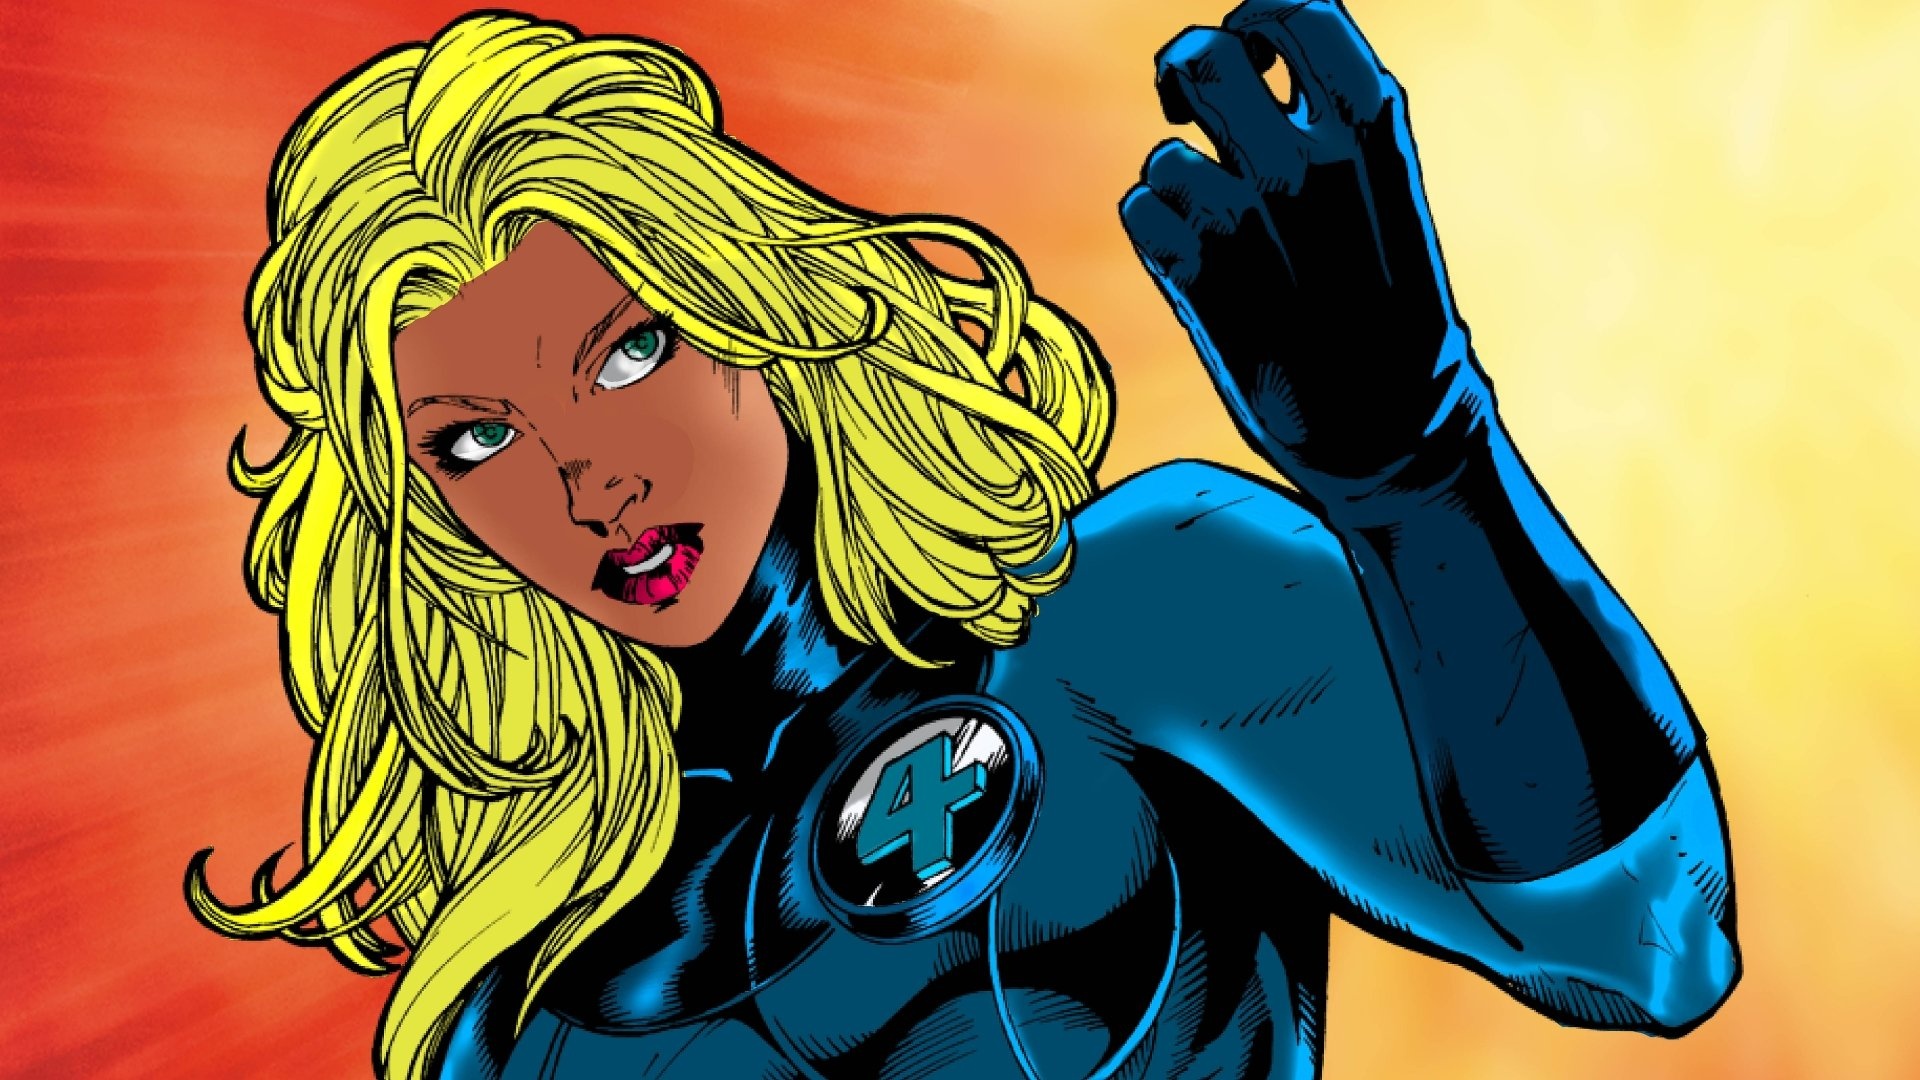 Invisible Woman, 4K Ultra HD, Desktop wallpapers, High-quality images, 1920x1080 Full HD Desktop